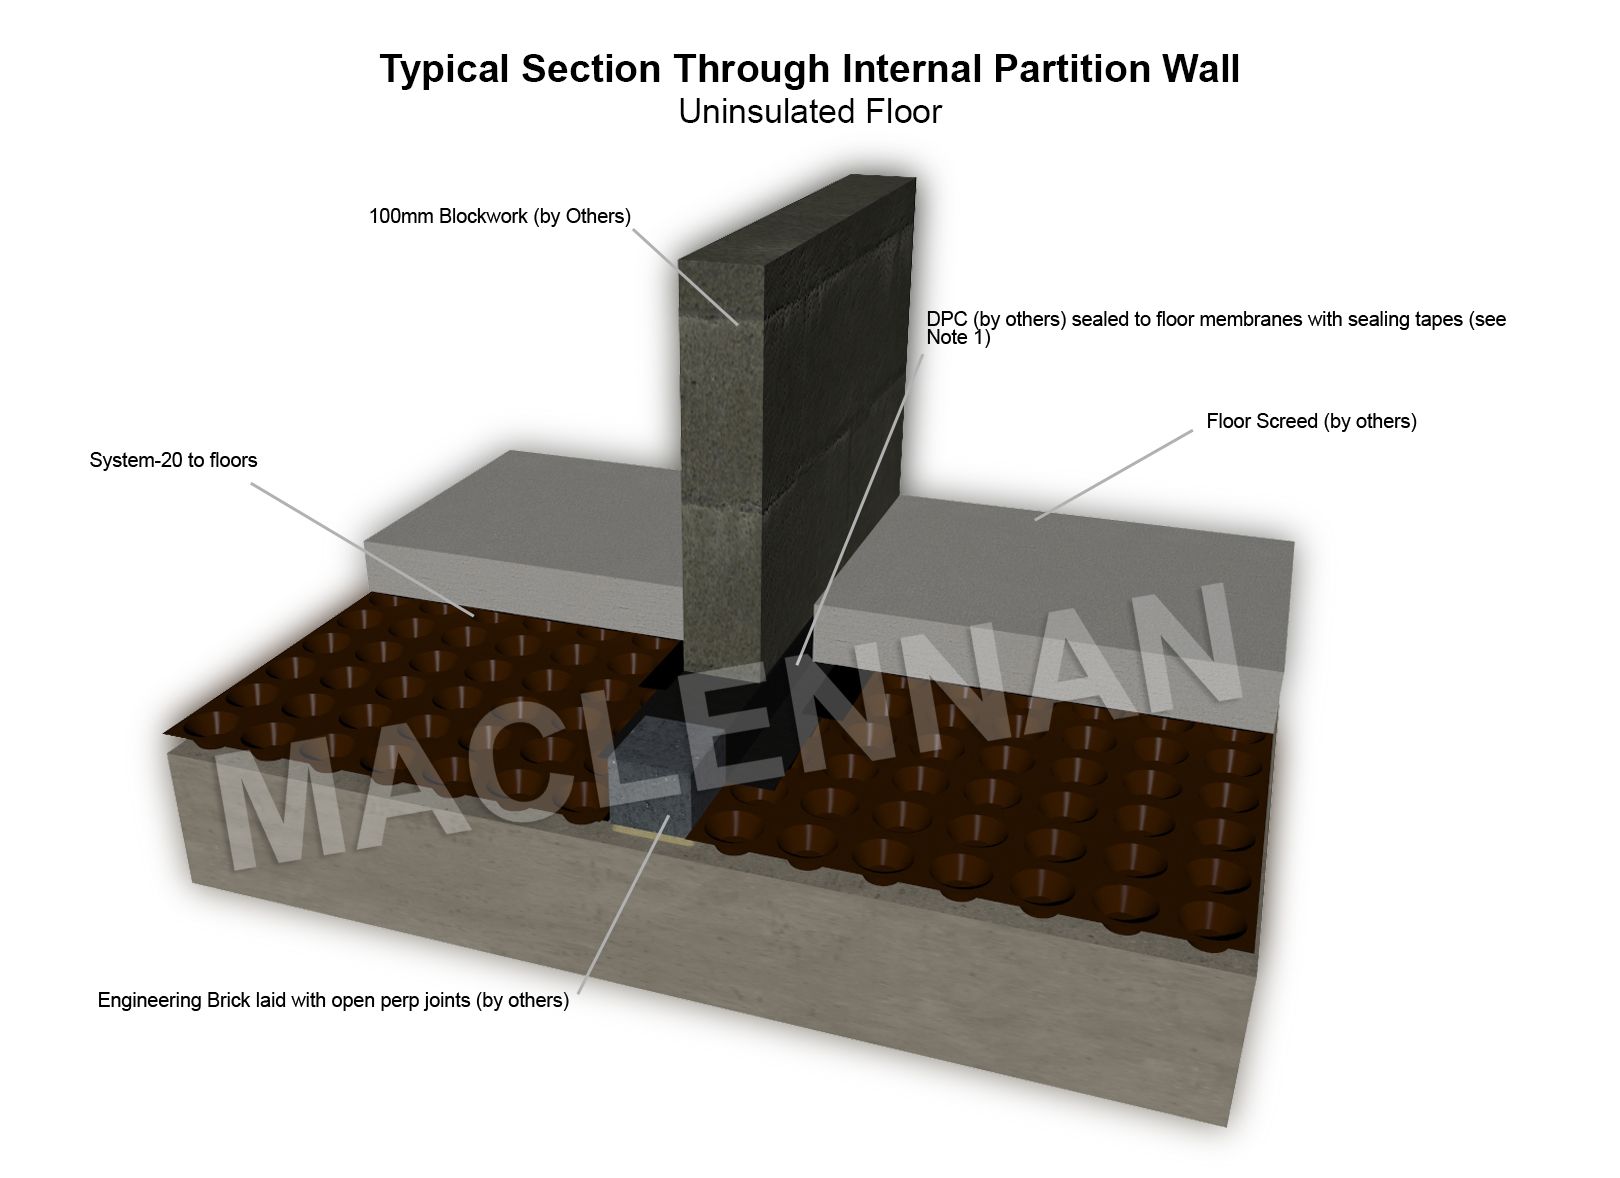 3D drawing of typical section through Partition wall